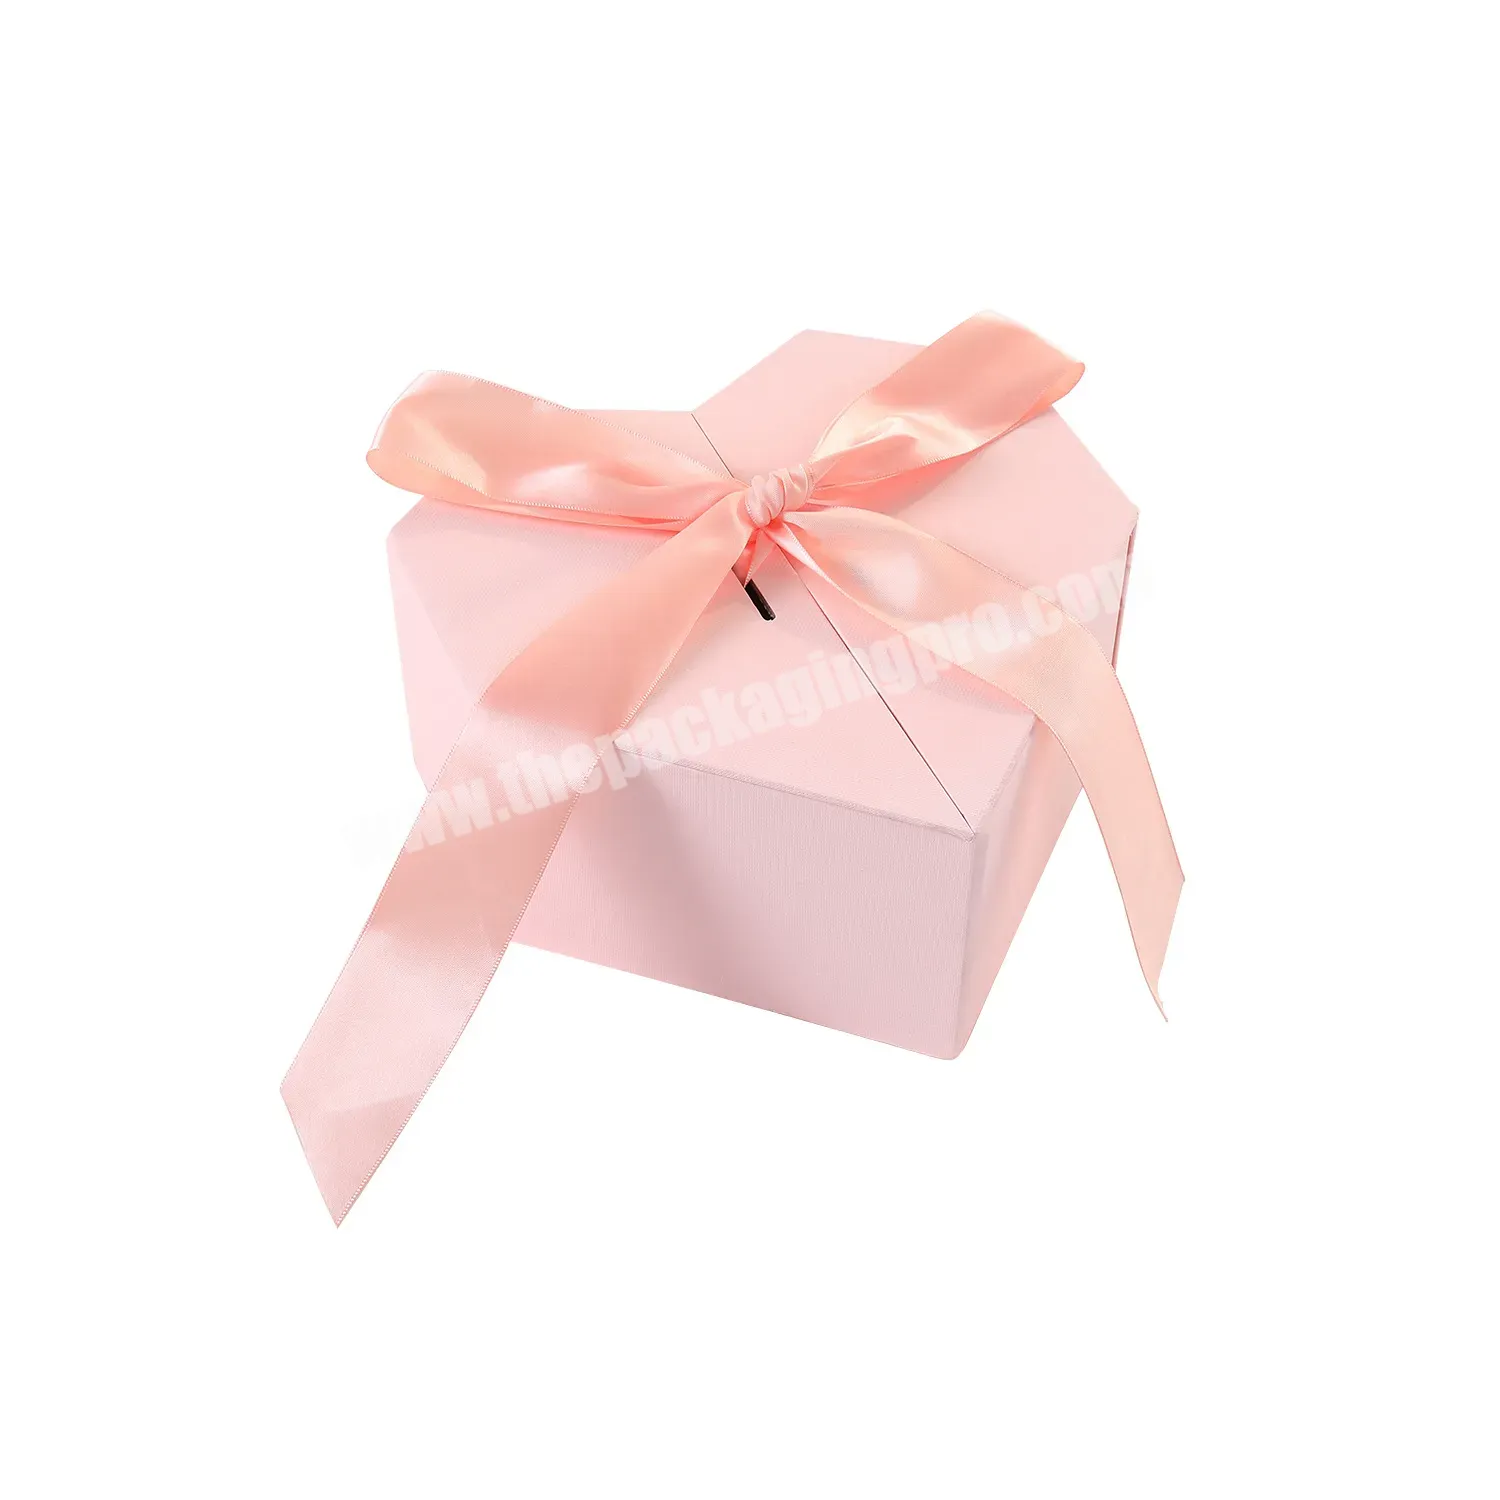 Wholesale Custom Heart Paper Bow Packing Box Wedding Party Candy Gift Packing Box With Ribbon Closed - Buy Pink Gift Box,Custom Heart-shaped Gift Box,Cardboard Gift Box With Ribbon Closed.